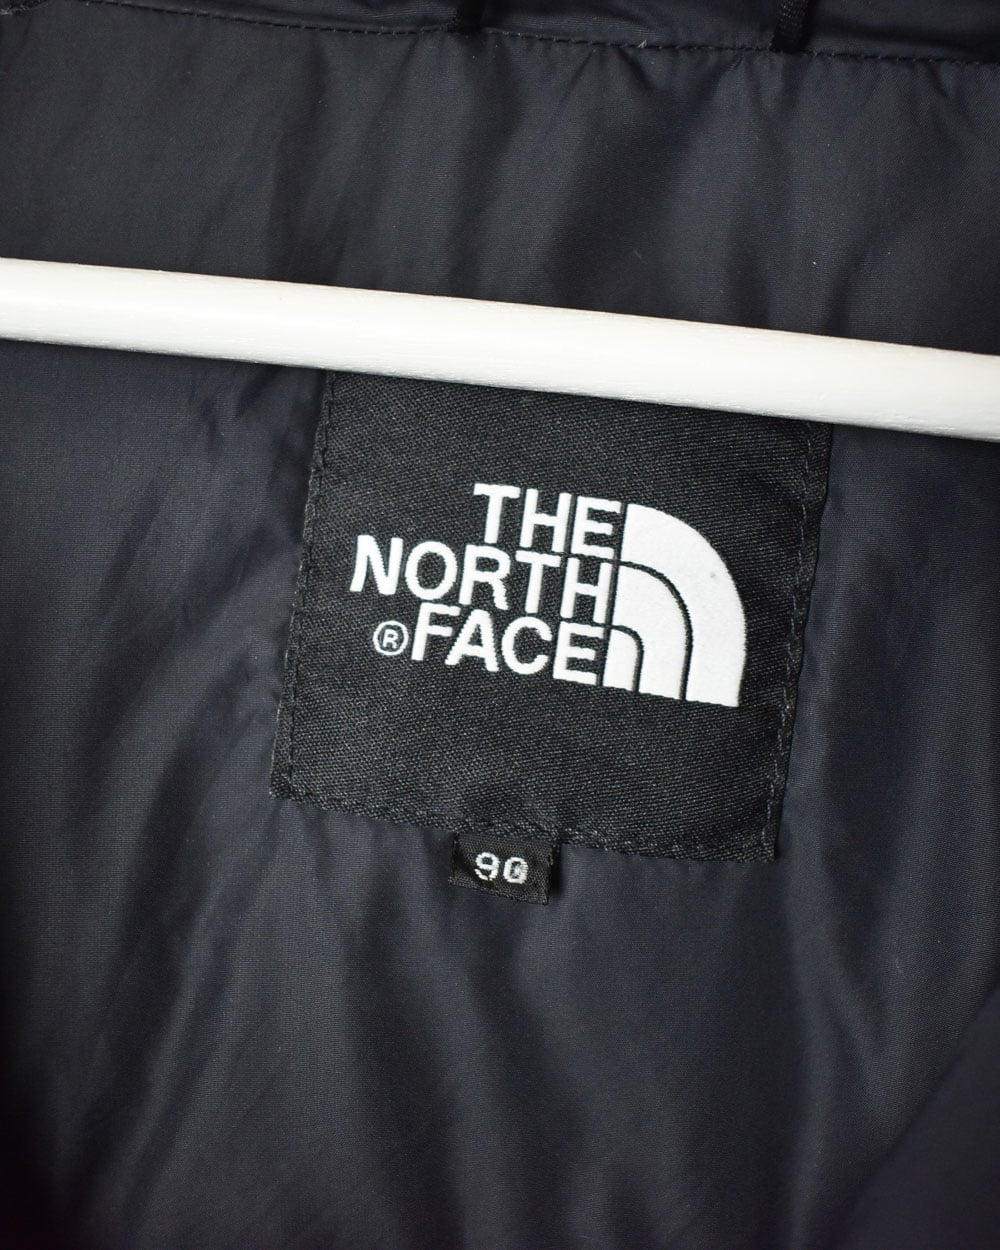 Navy The North Face Nuptse 700 Down Puffer Jacket - Small